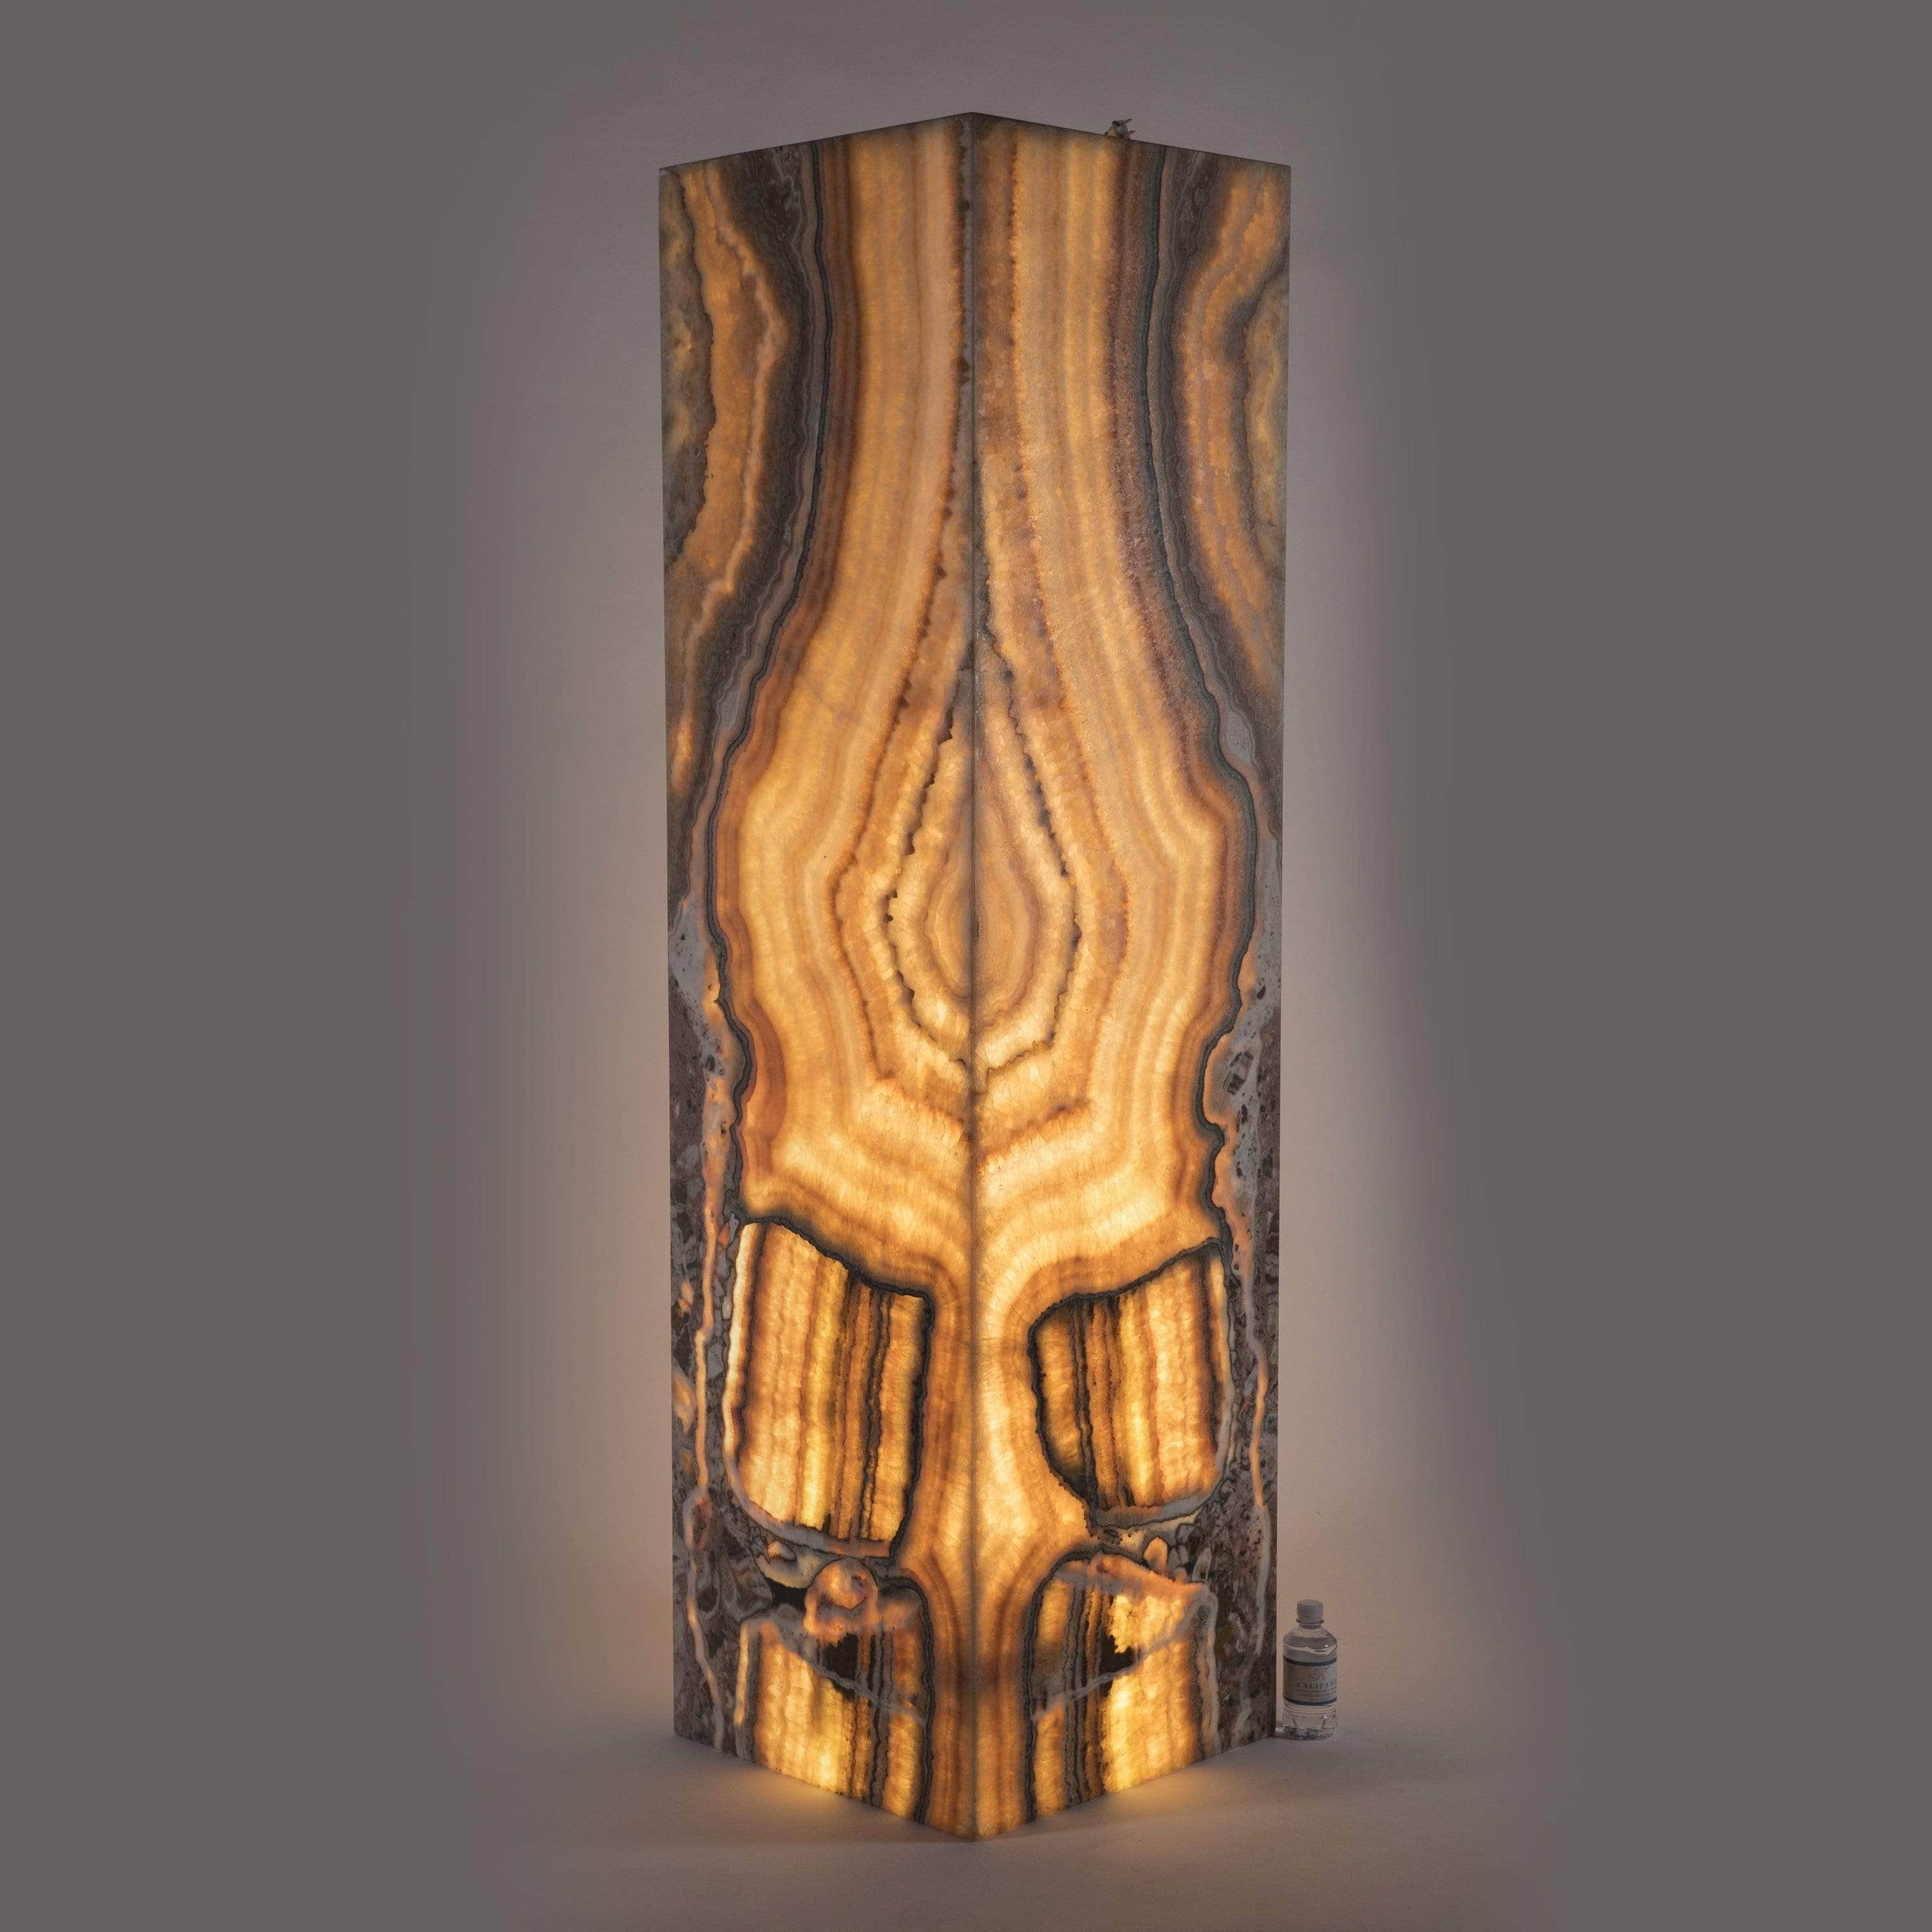 Rainbow Onyx Light Tower - 70 in x in x 20 in KALIFANO